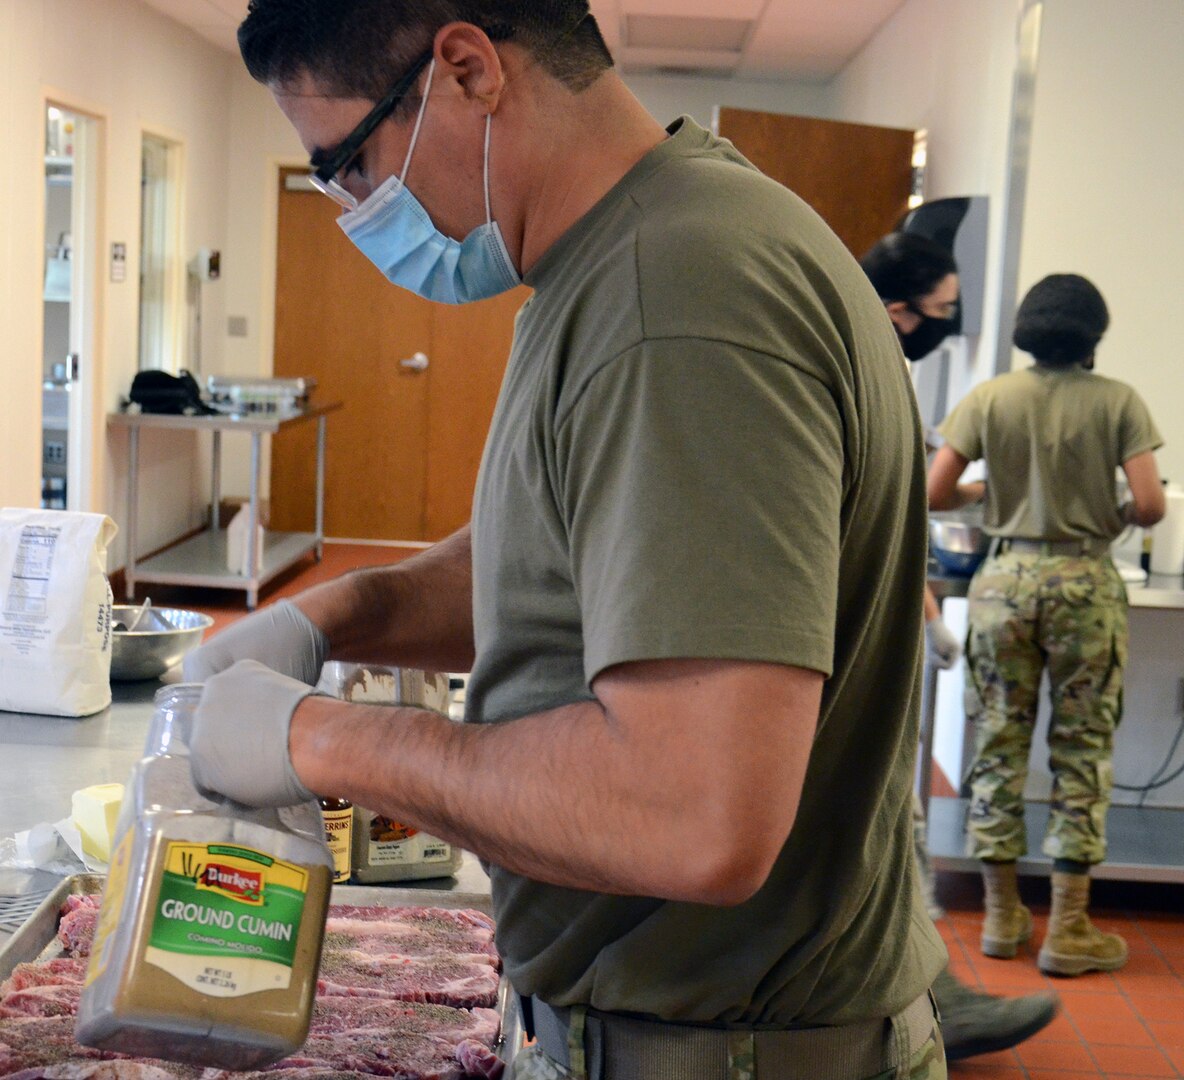 Master Sgt. Jorge Nikolas, an Air Force student in the Nutrition and Diet Therapy program at the Medical Education and Training Campus at Joint Base San Antonio-Fort Sam Houston, prepares a tray of steaks in the kitchen training laboratory.